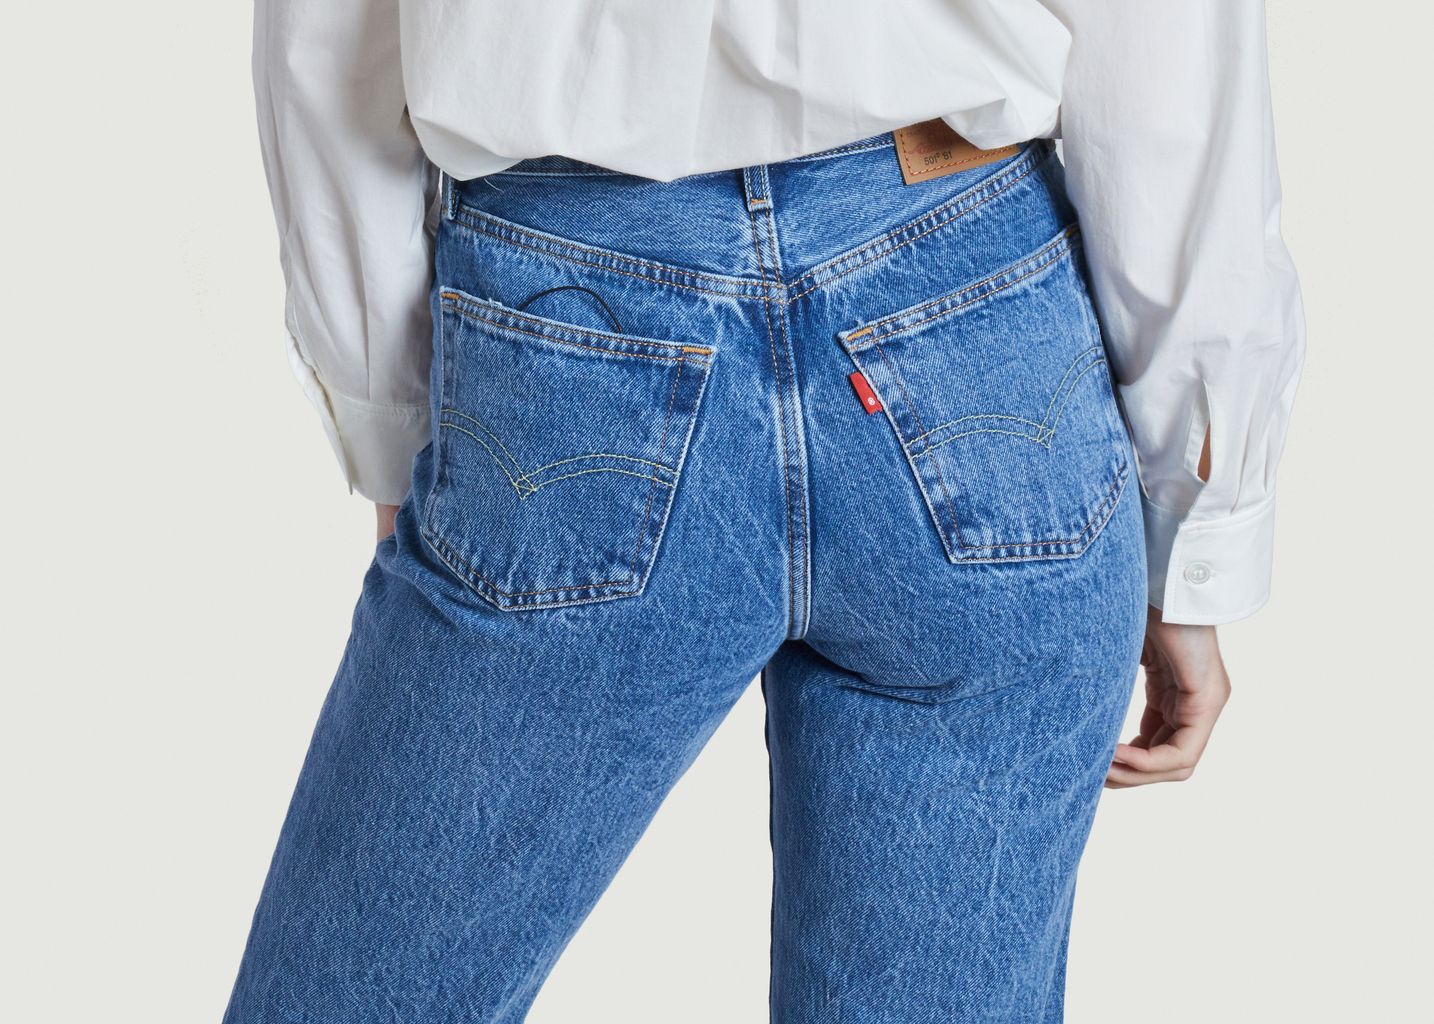 Jeans 501® '81 - Levi's Red Tab